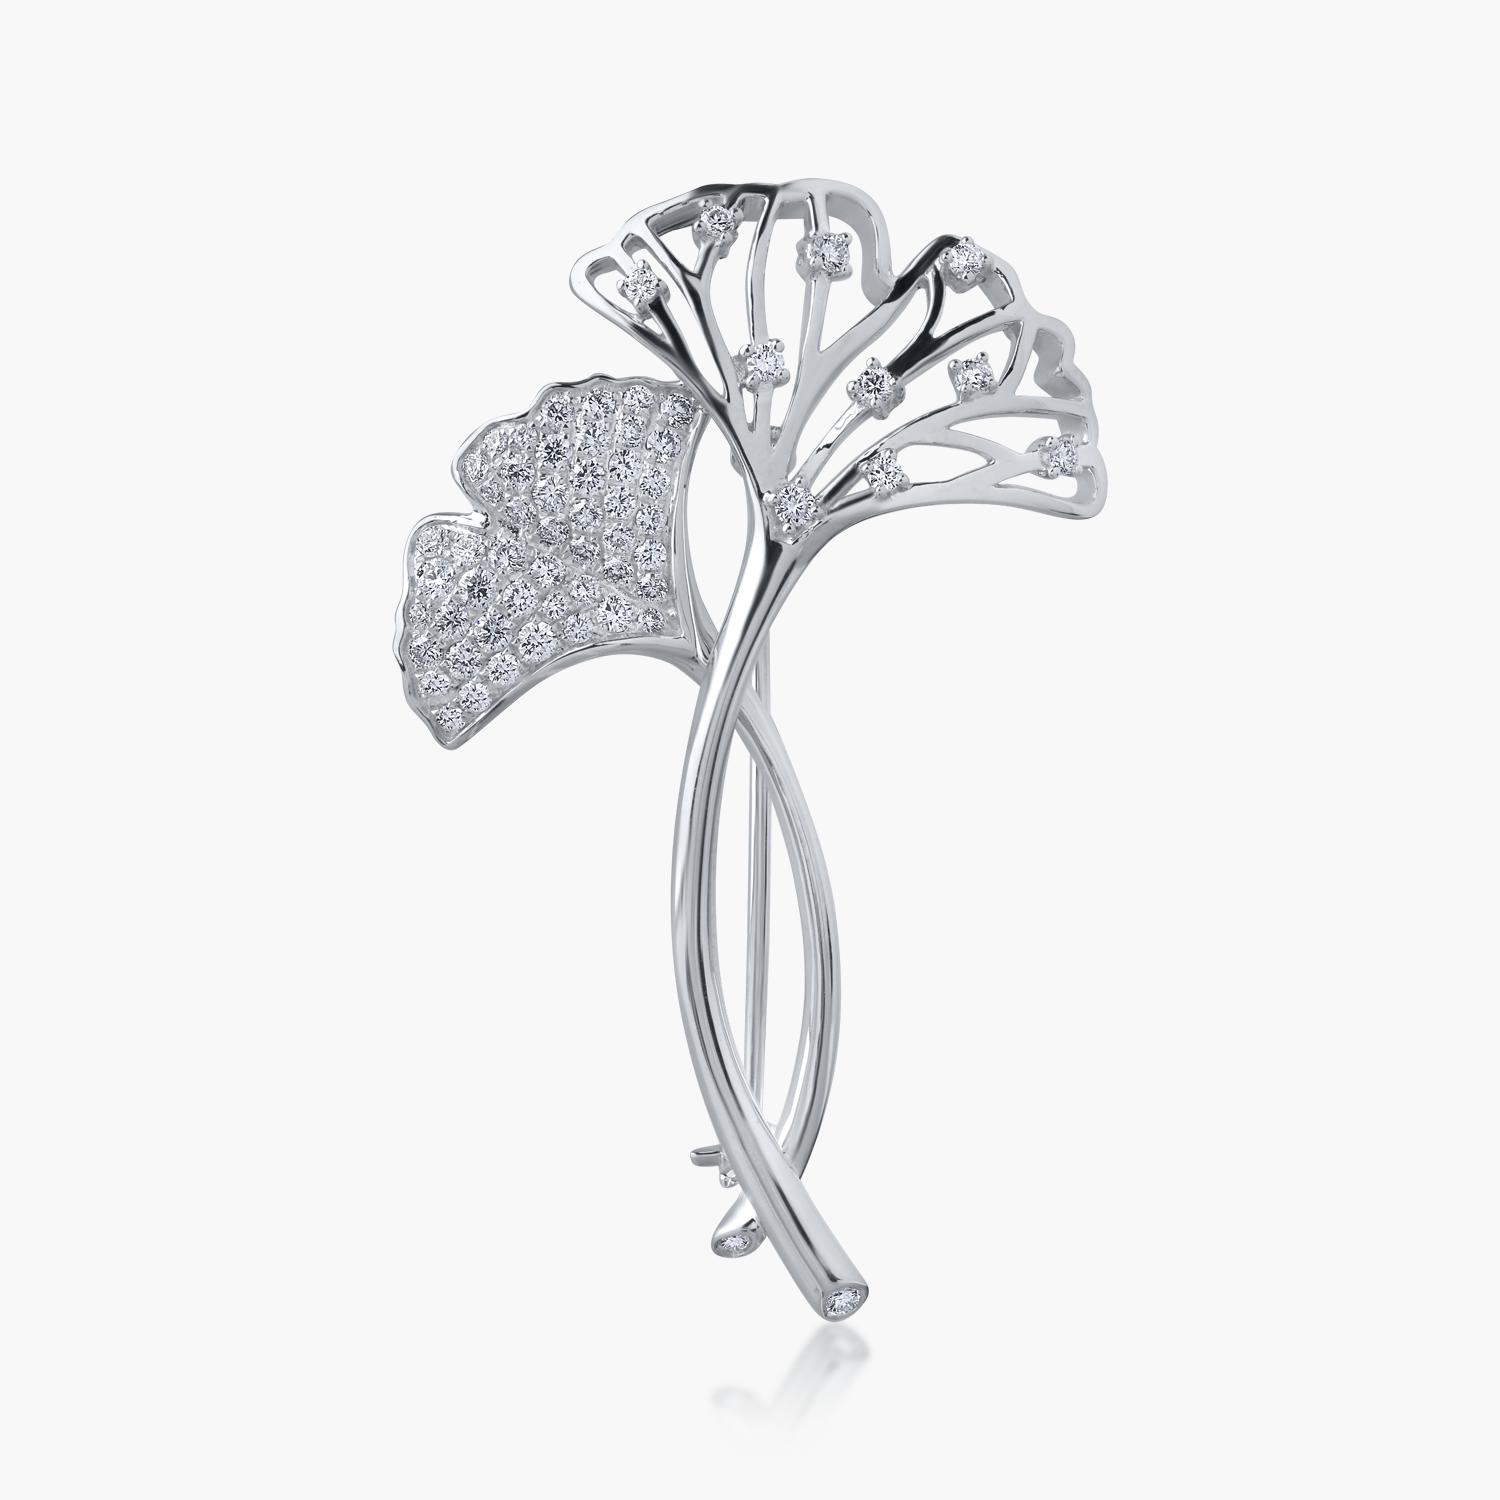 18K white gold brooch with 0.86ct diamonds